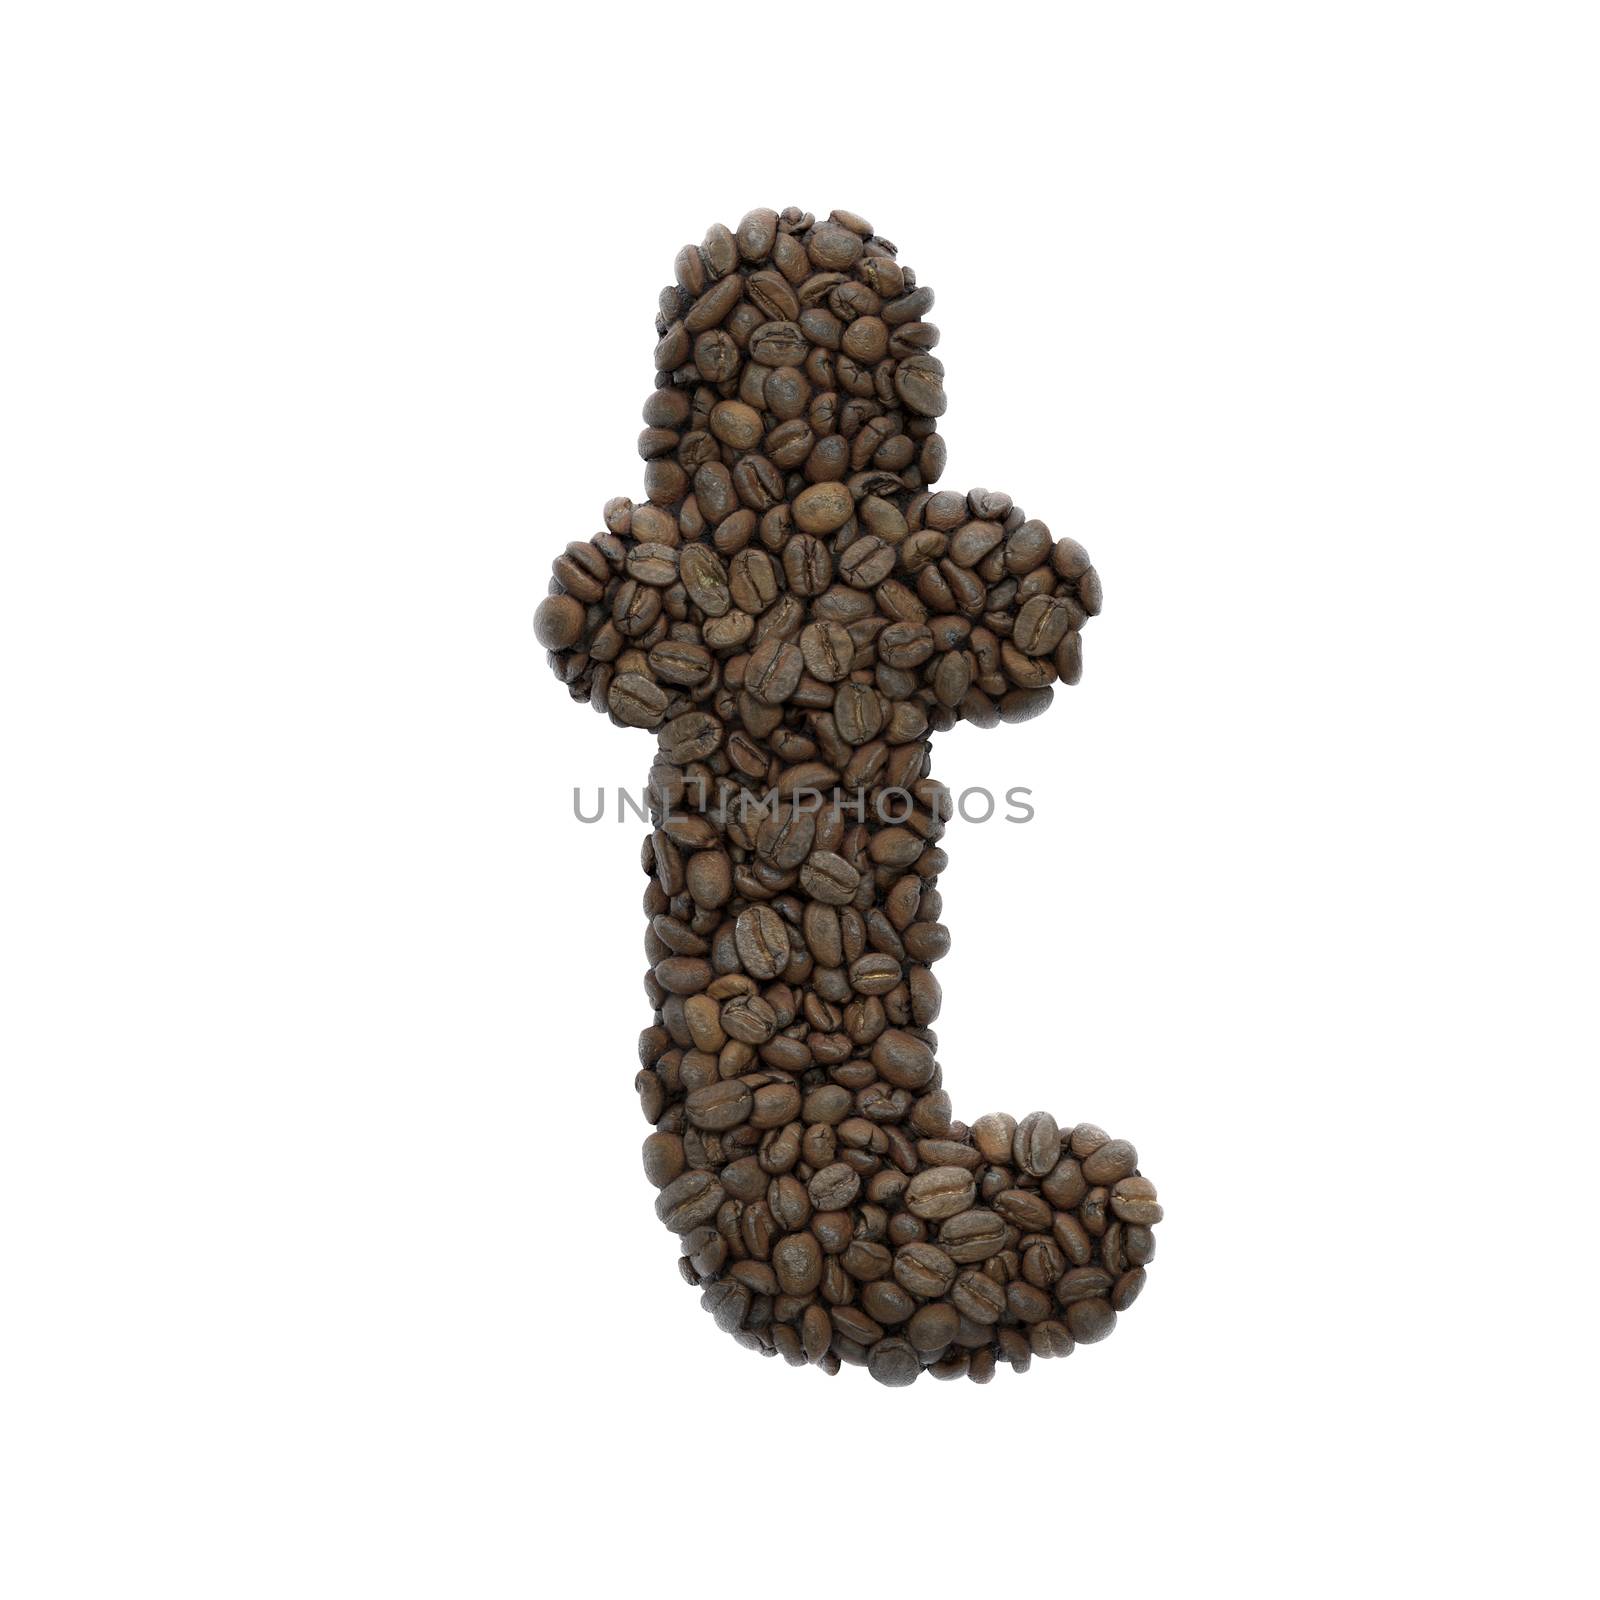 Coffee letter T - Lower-case 3d roasted beans font isolated on white background. This alphabet is perfect for creative illustrations related but not limited to Coffee, energy, insomnia...